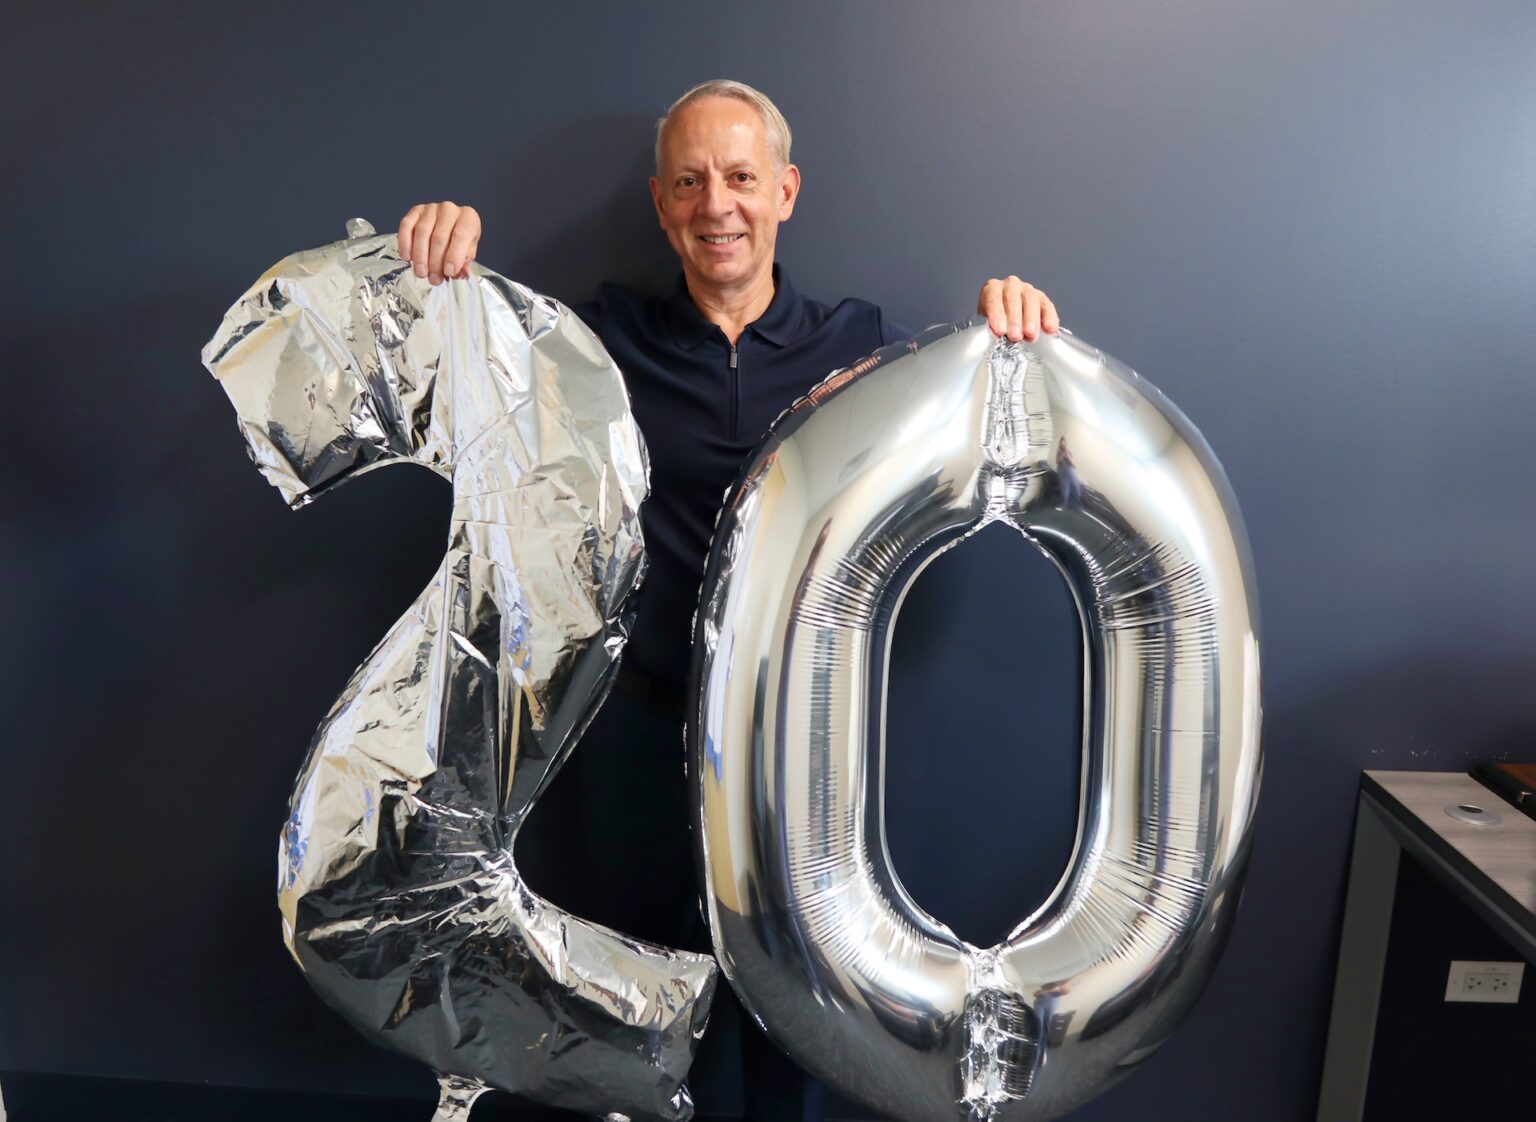 Man holding up balloon number 20